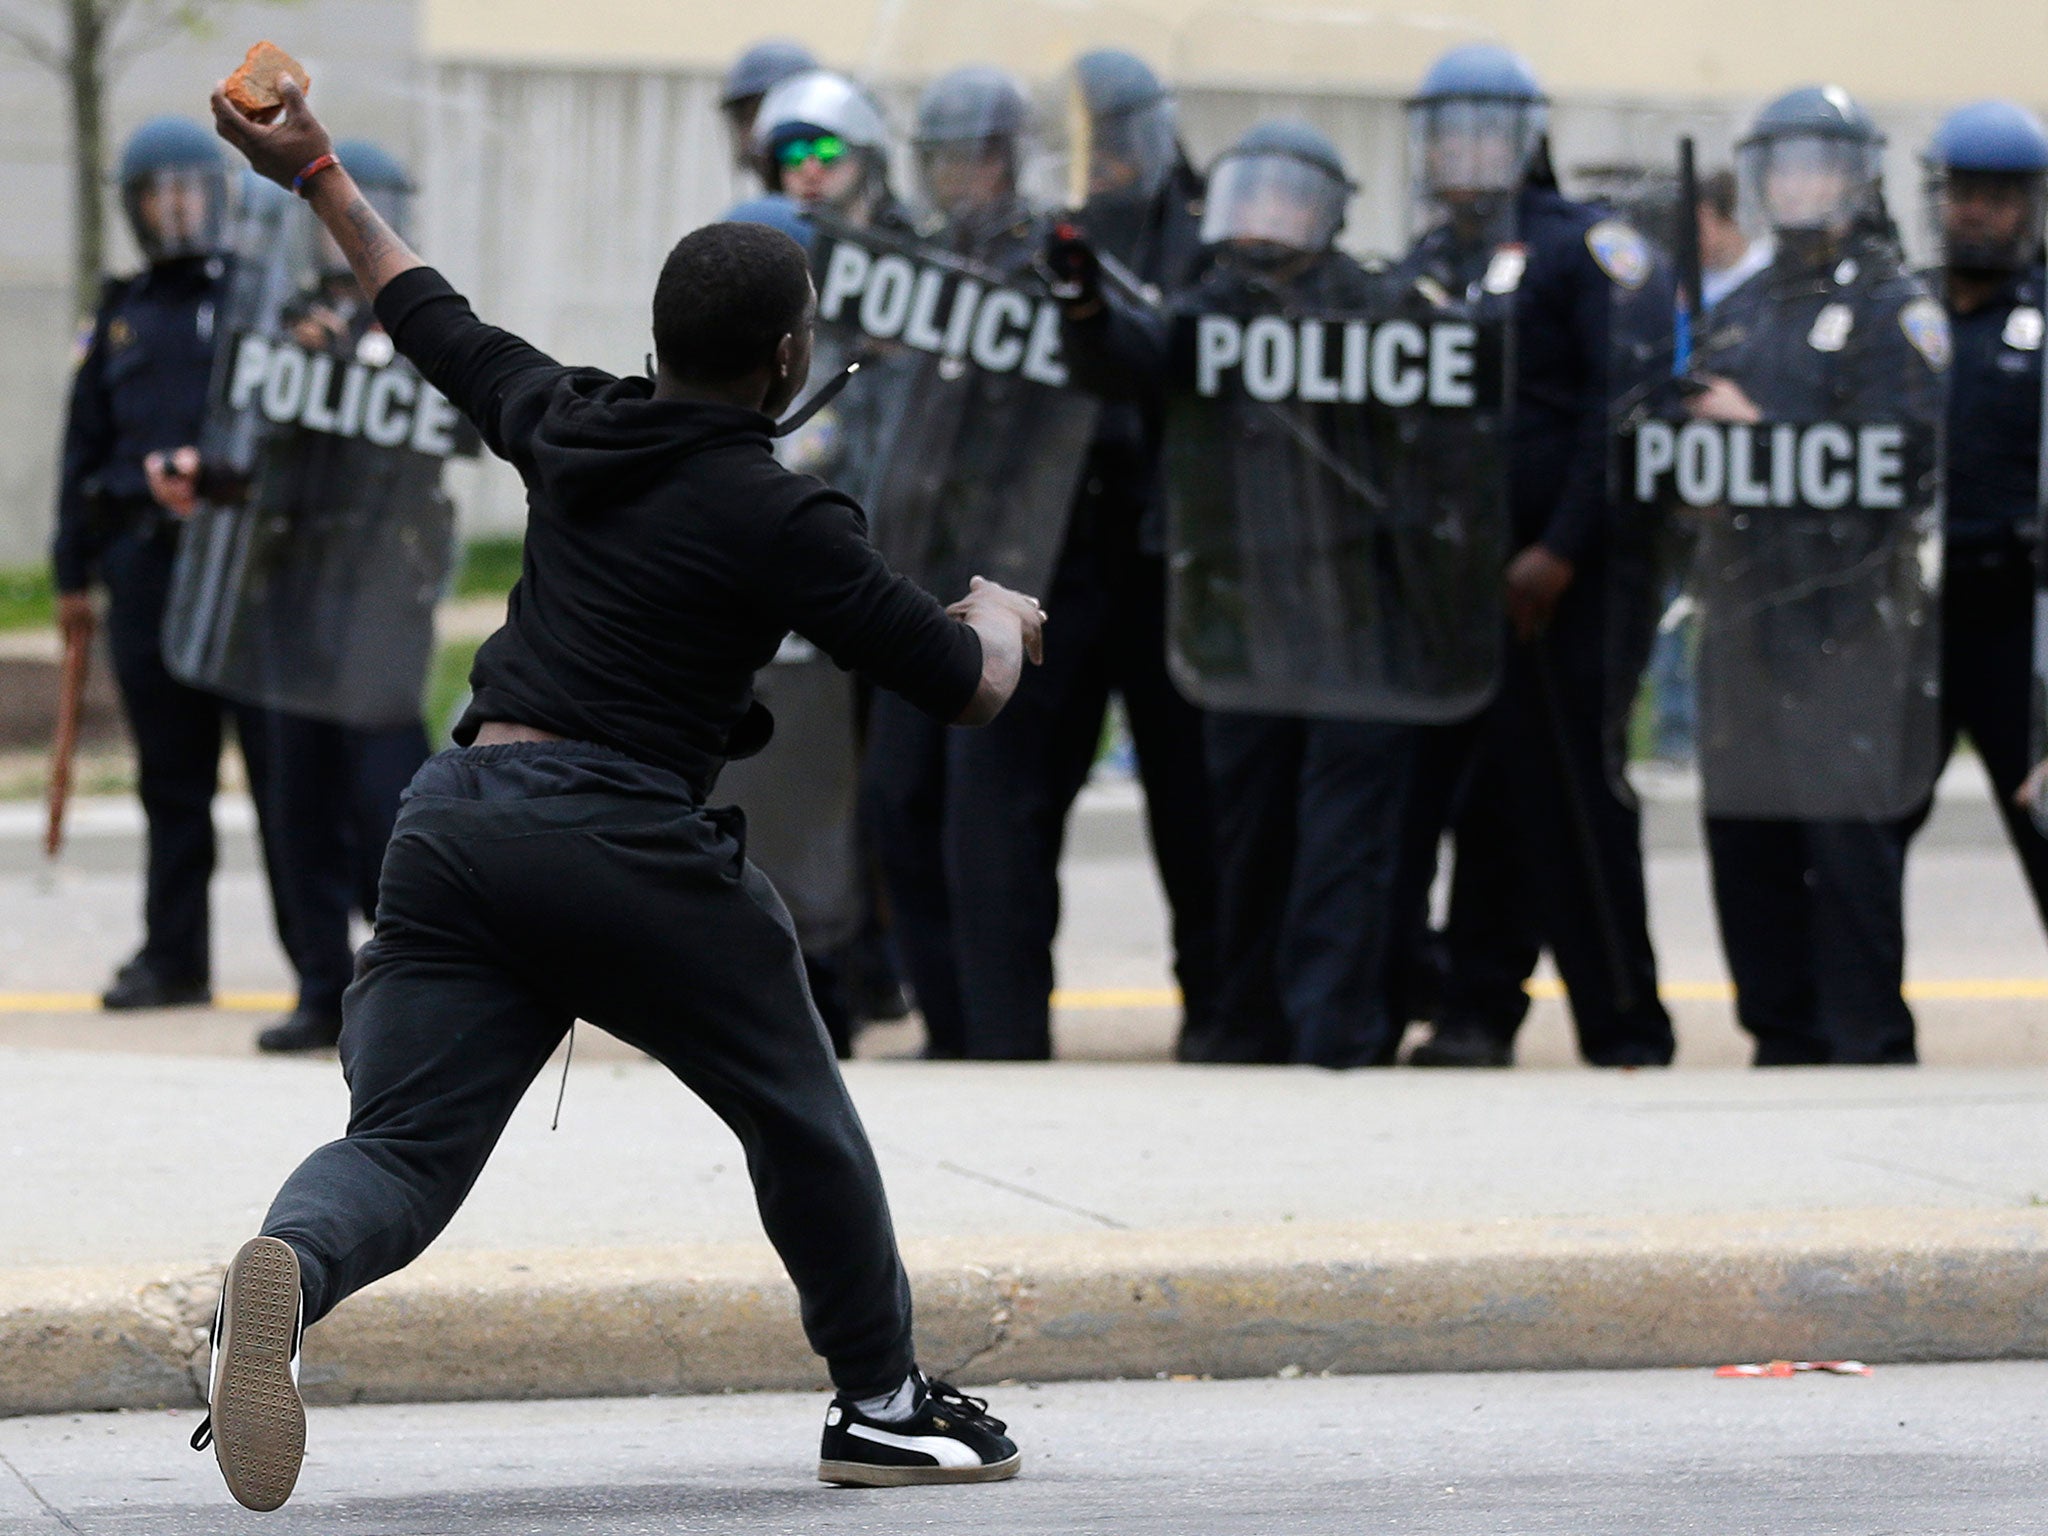 A man throws a brick at police, following the funeral of Freddie Gray in Baltimore